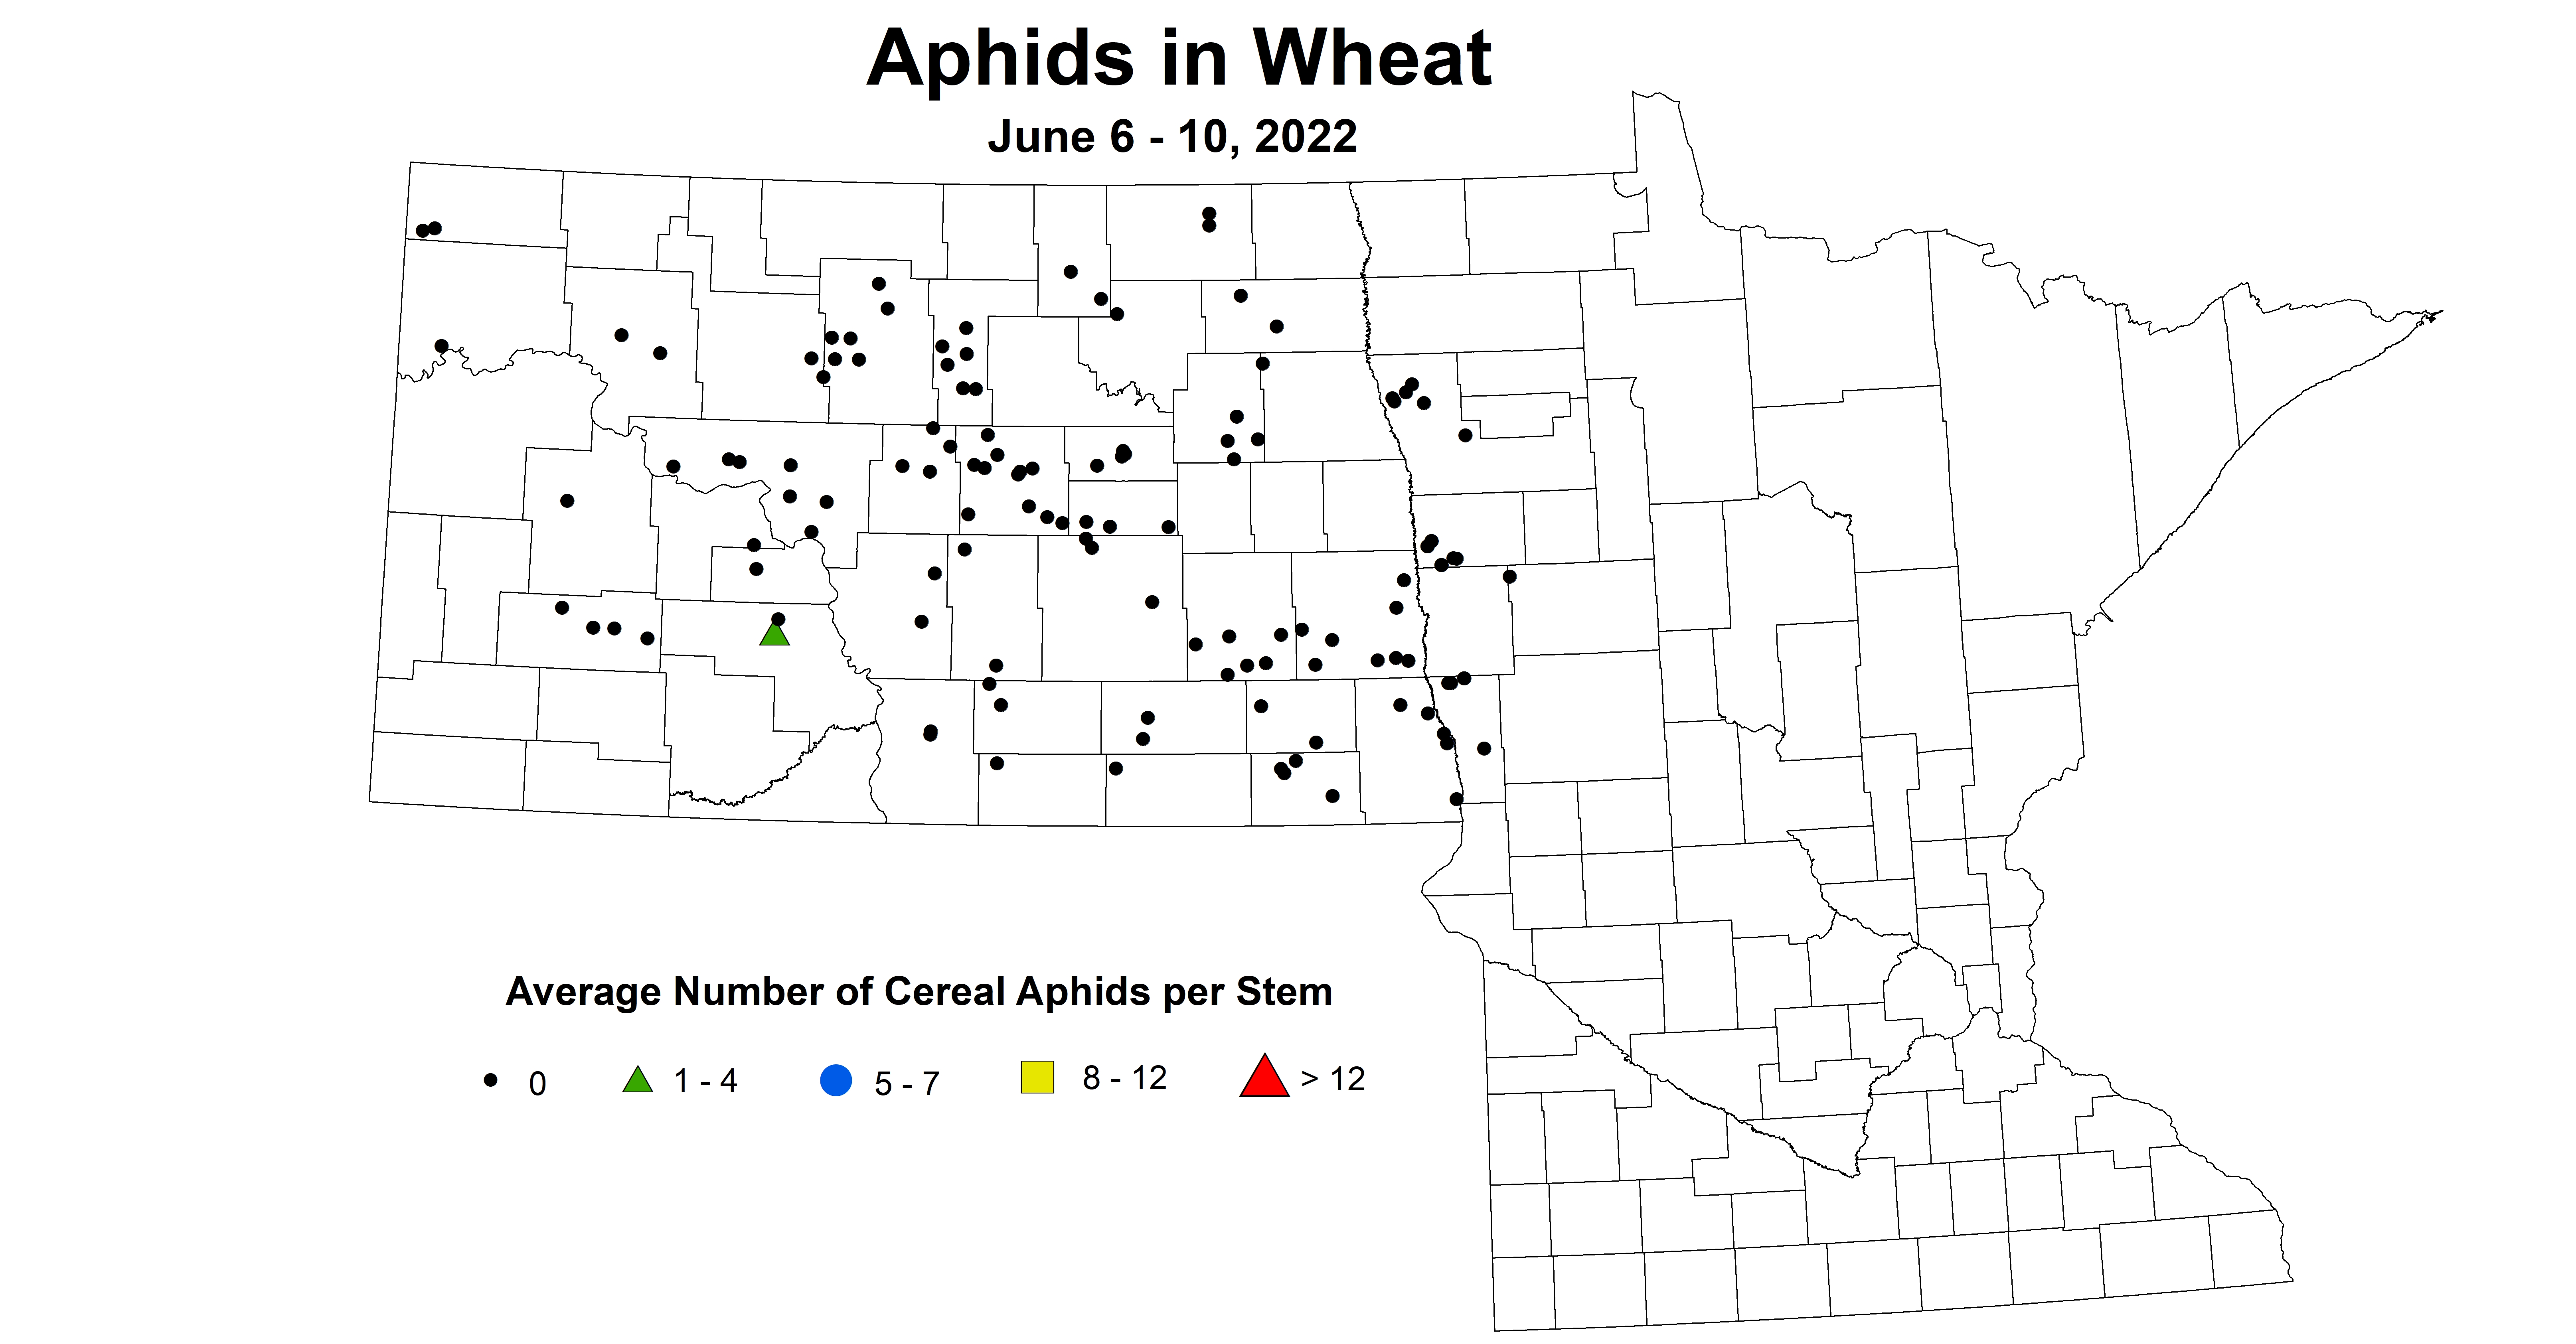 ND IPM map of wheat aphids June 6-10, 2022